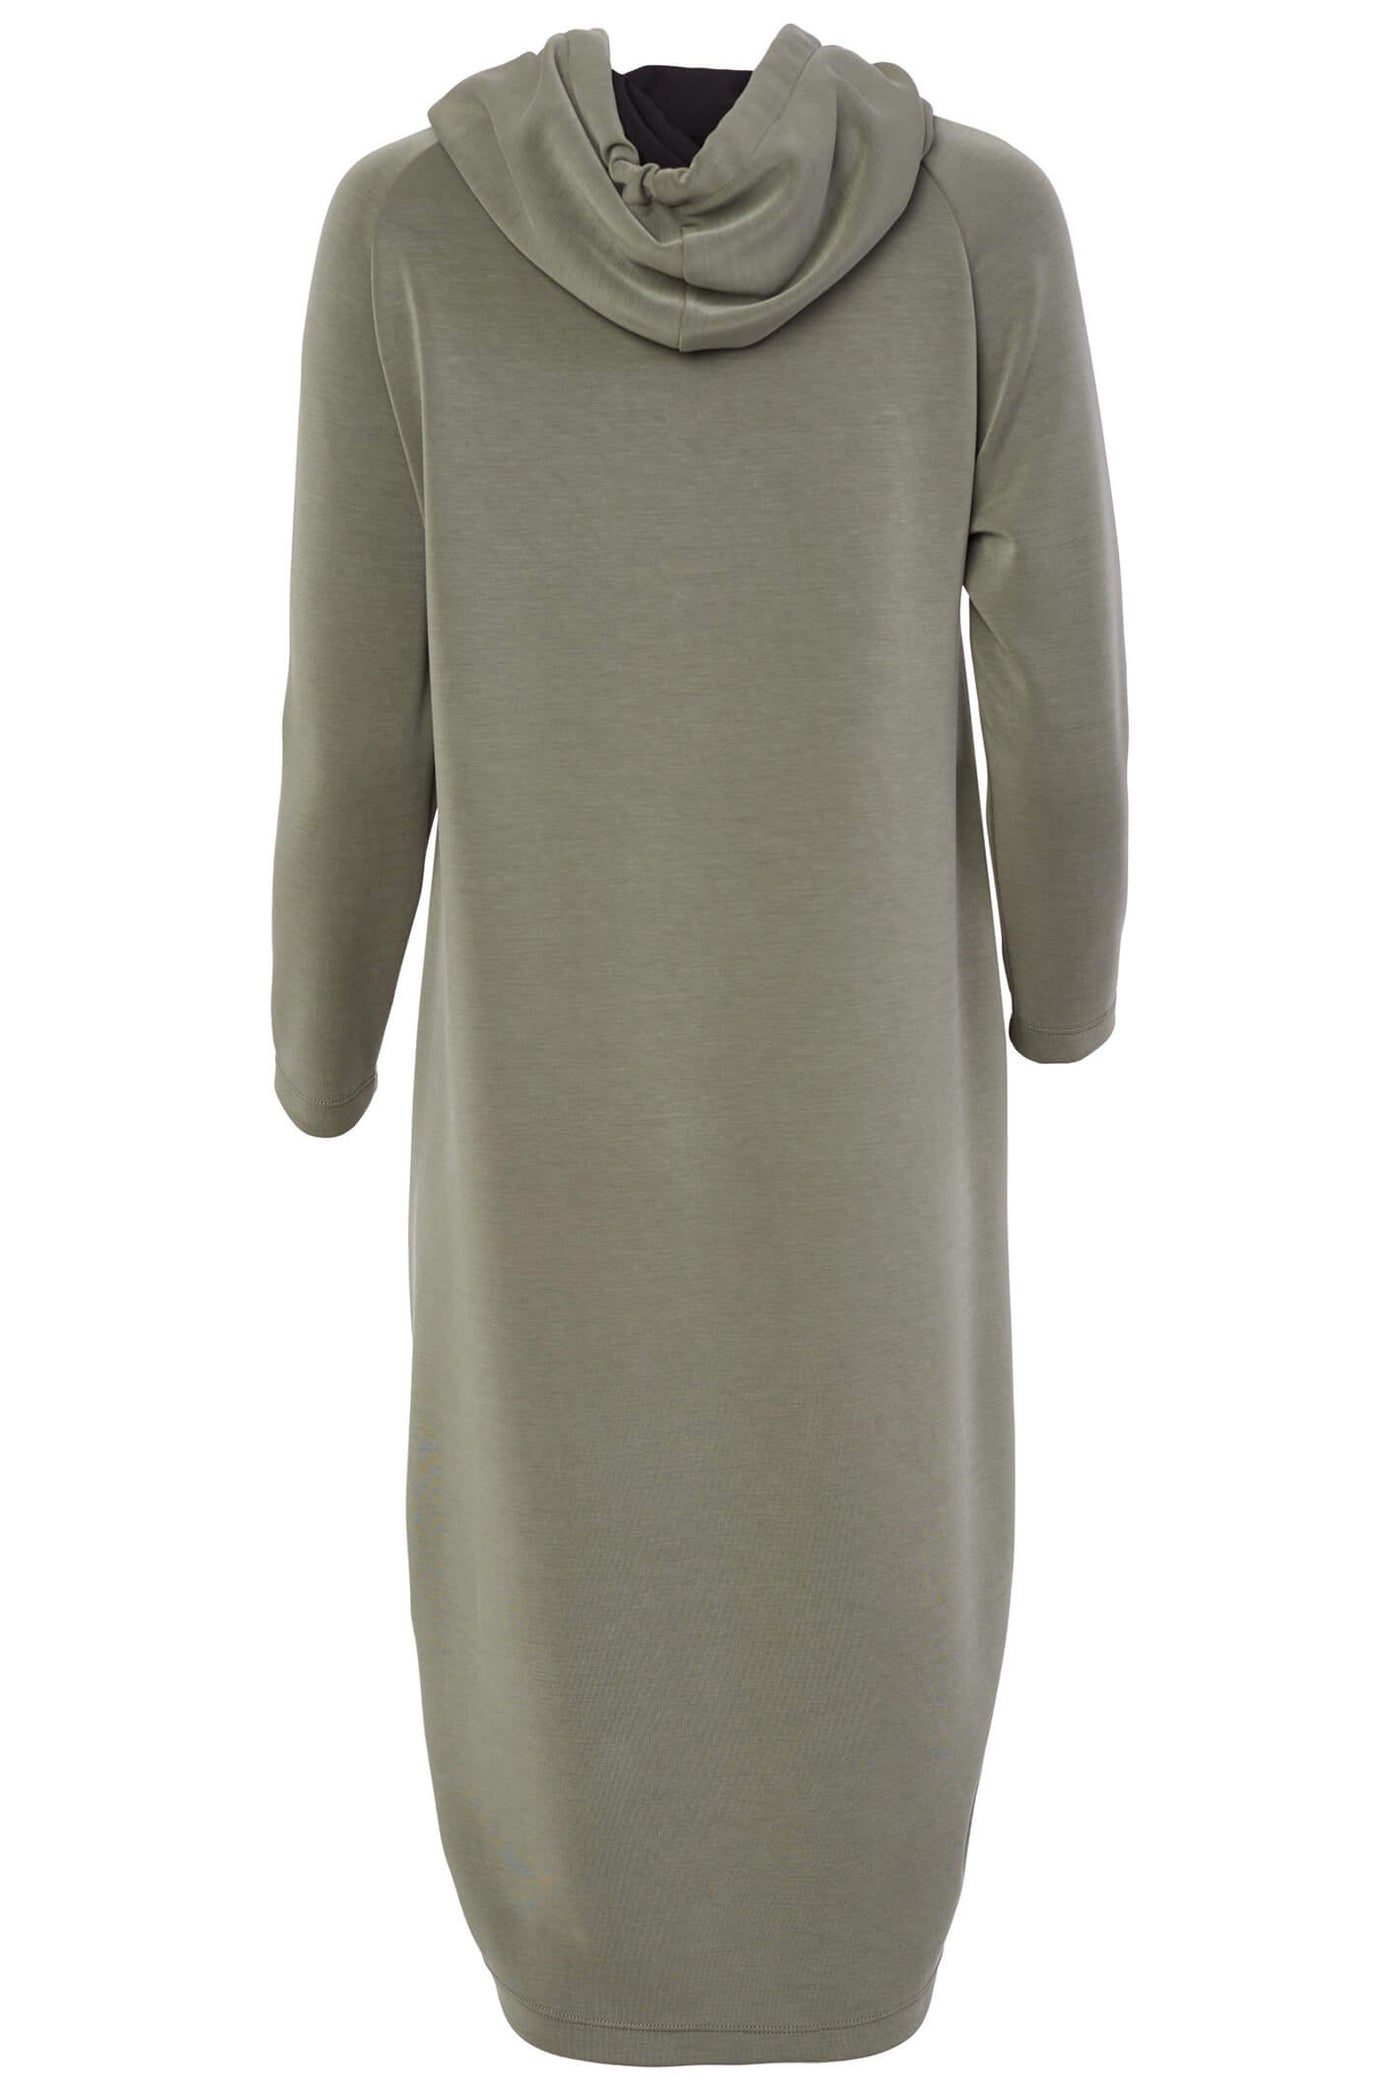 Naya NAW23218 Green Fleece Hooded Dress With Sleeves - Rouge Boutique